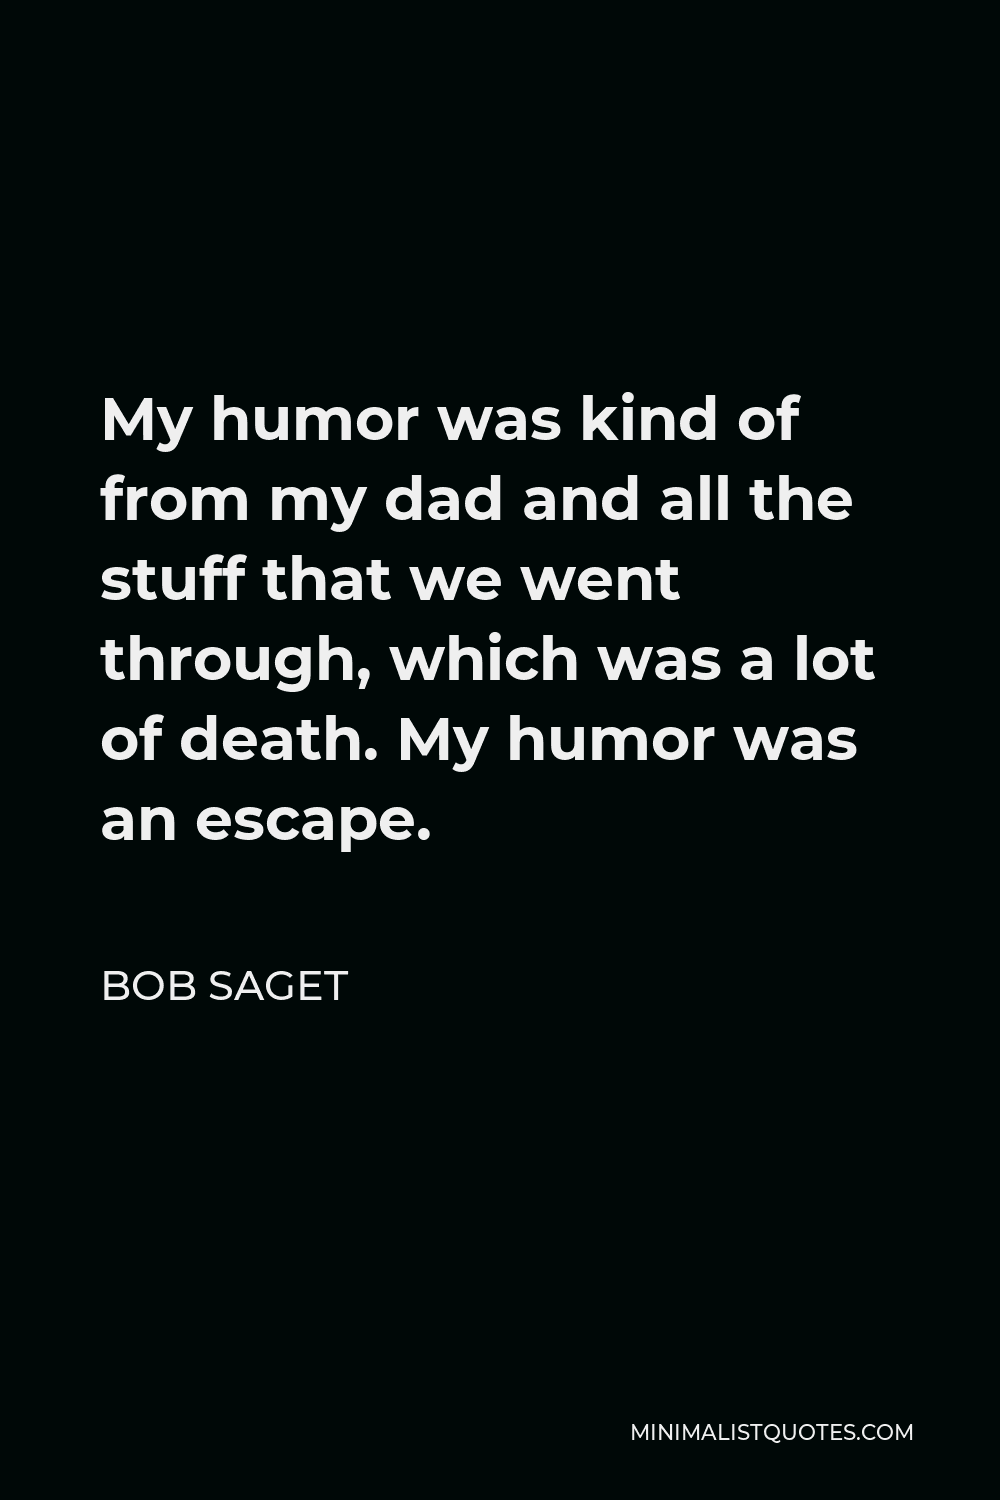 Bob Saget Quote - My humor was kind of from my dad and all the stuff that we went through, which was a lot of death. My humor was an escape.